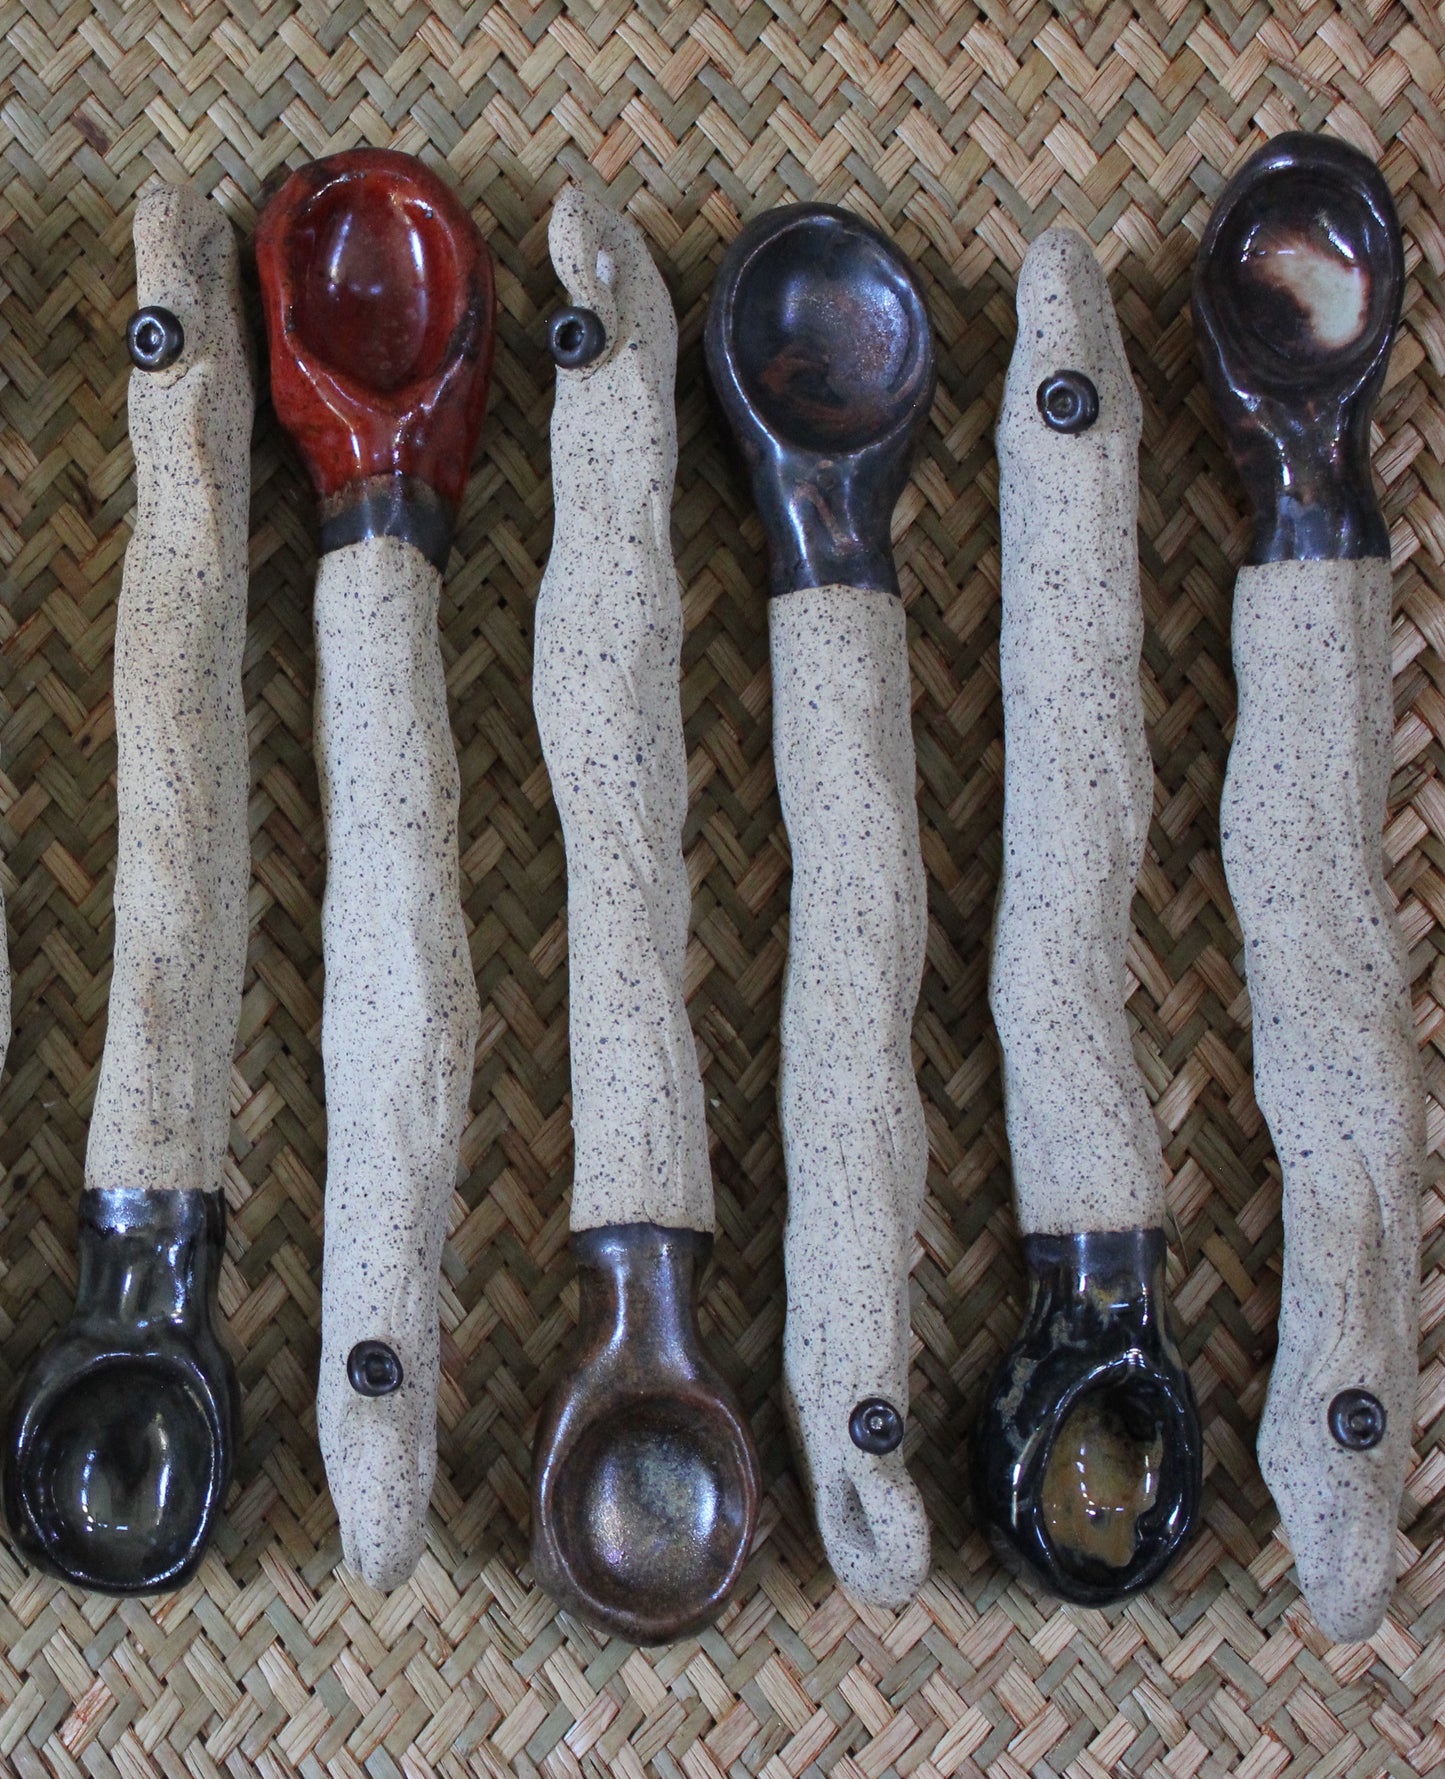 Earthy Ceramic Black-Carmel Serving Spoon as a Unique Ornament or for Food Consumption